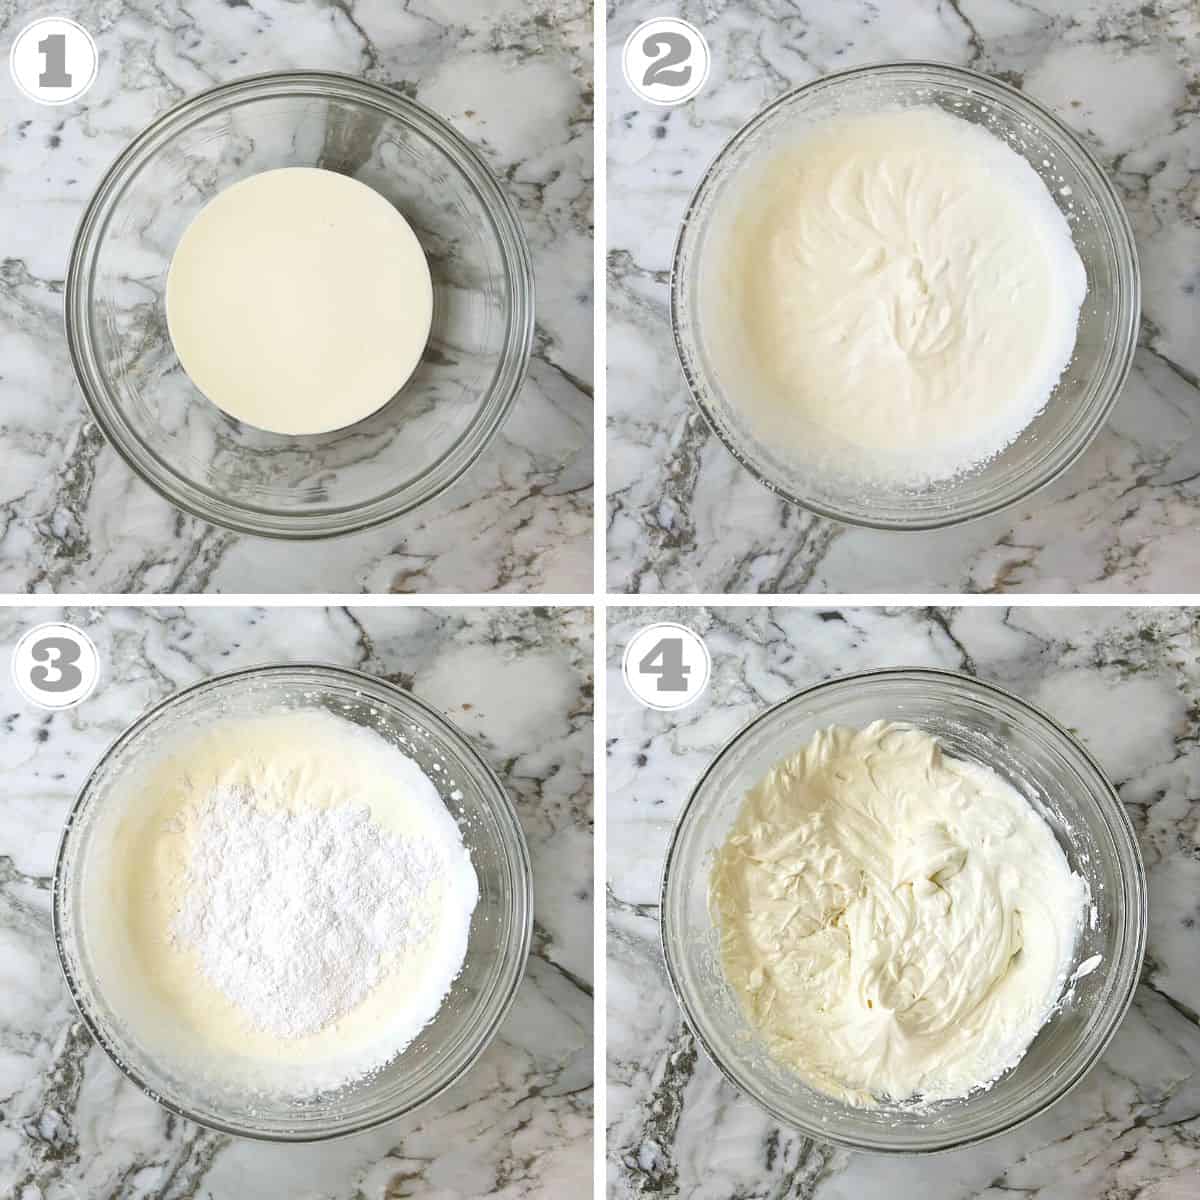 photos one through four showing how to whip heavy cream and sugar 